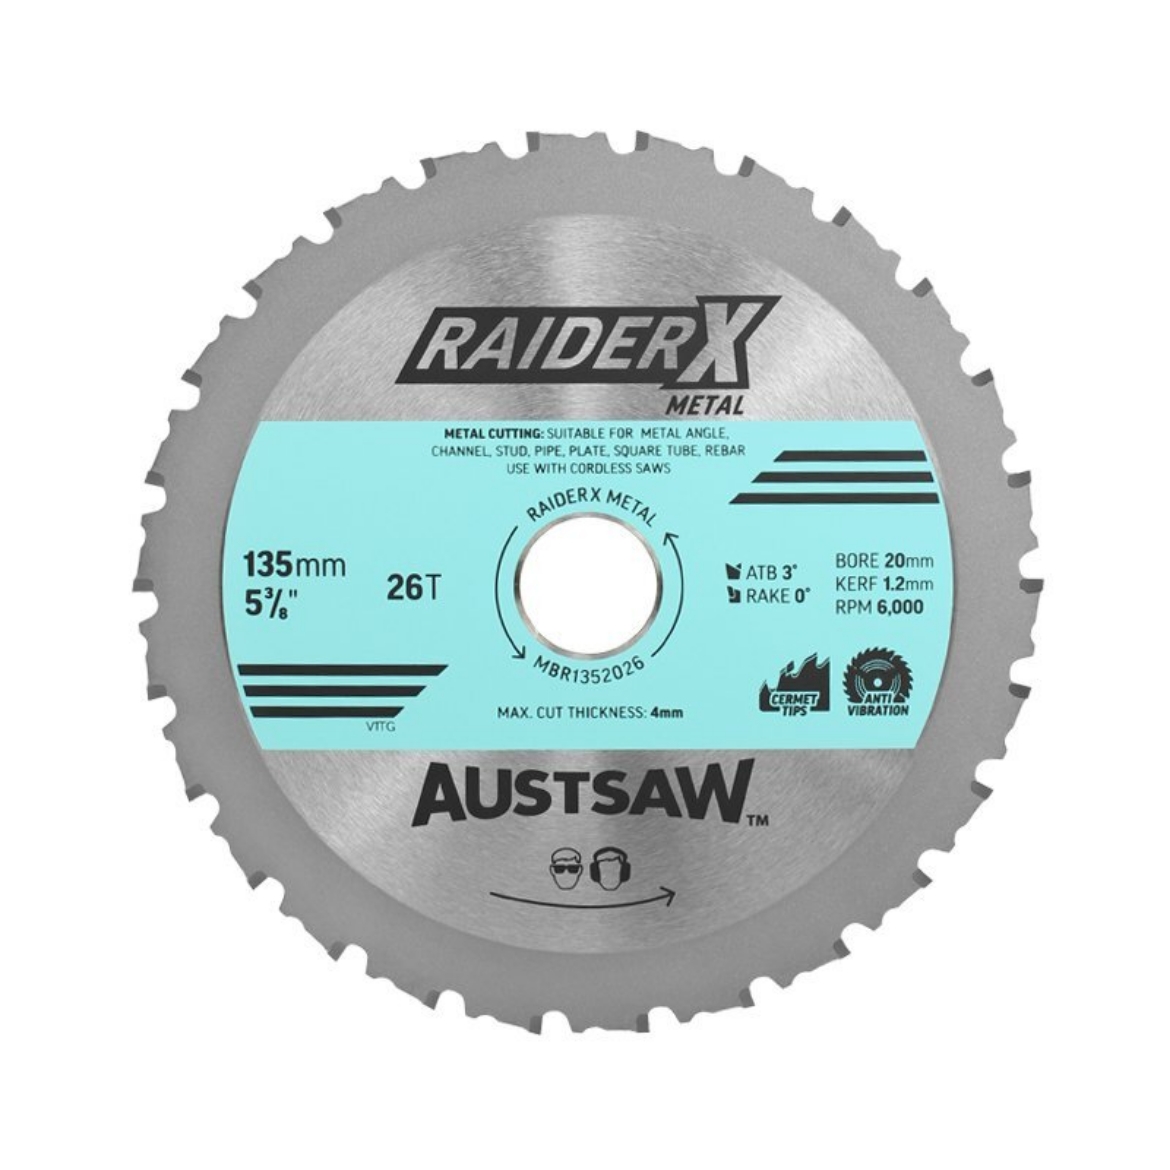 Picture of Austsaw RaiderX Metal Blade 135mm x 20 x 26T